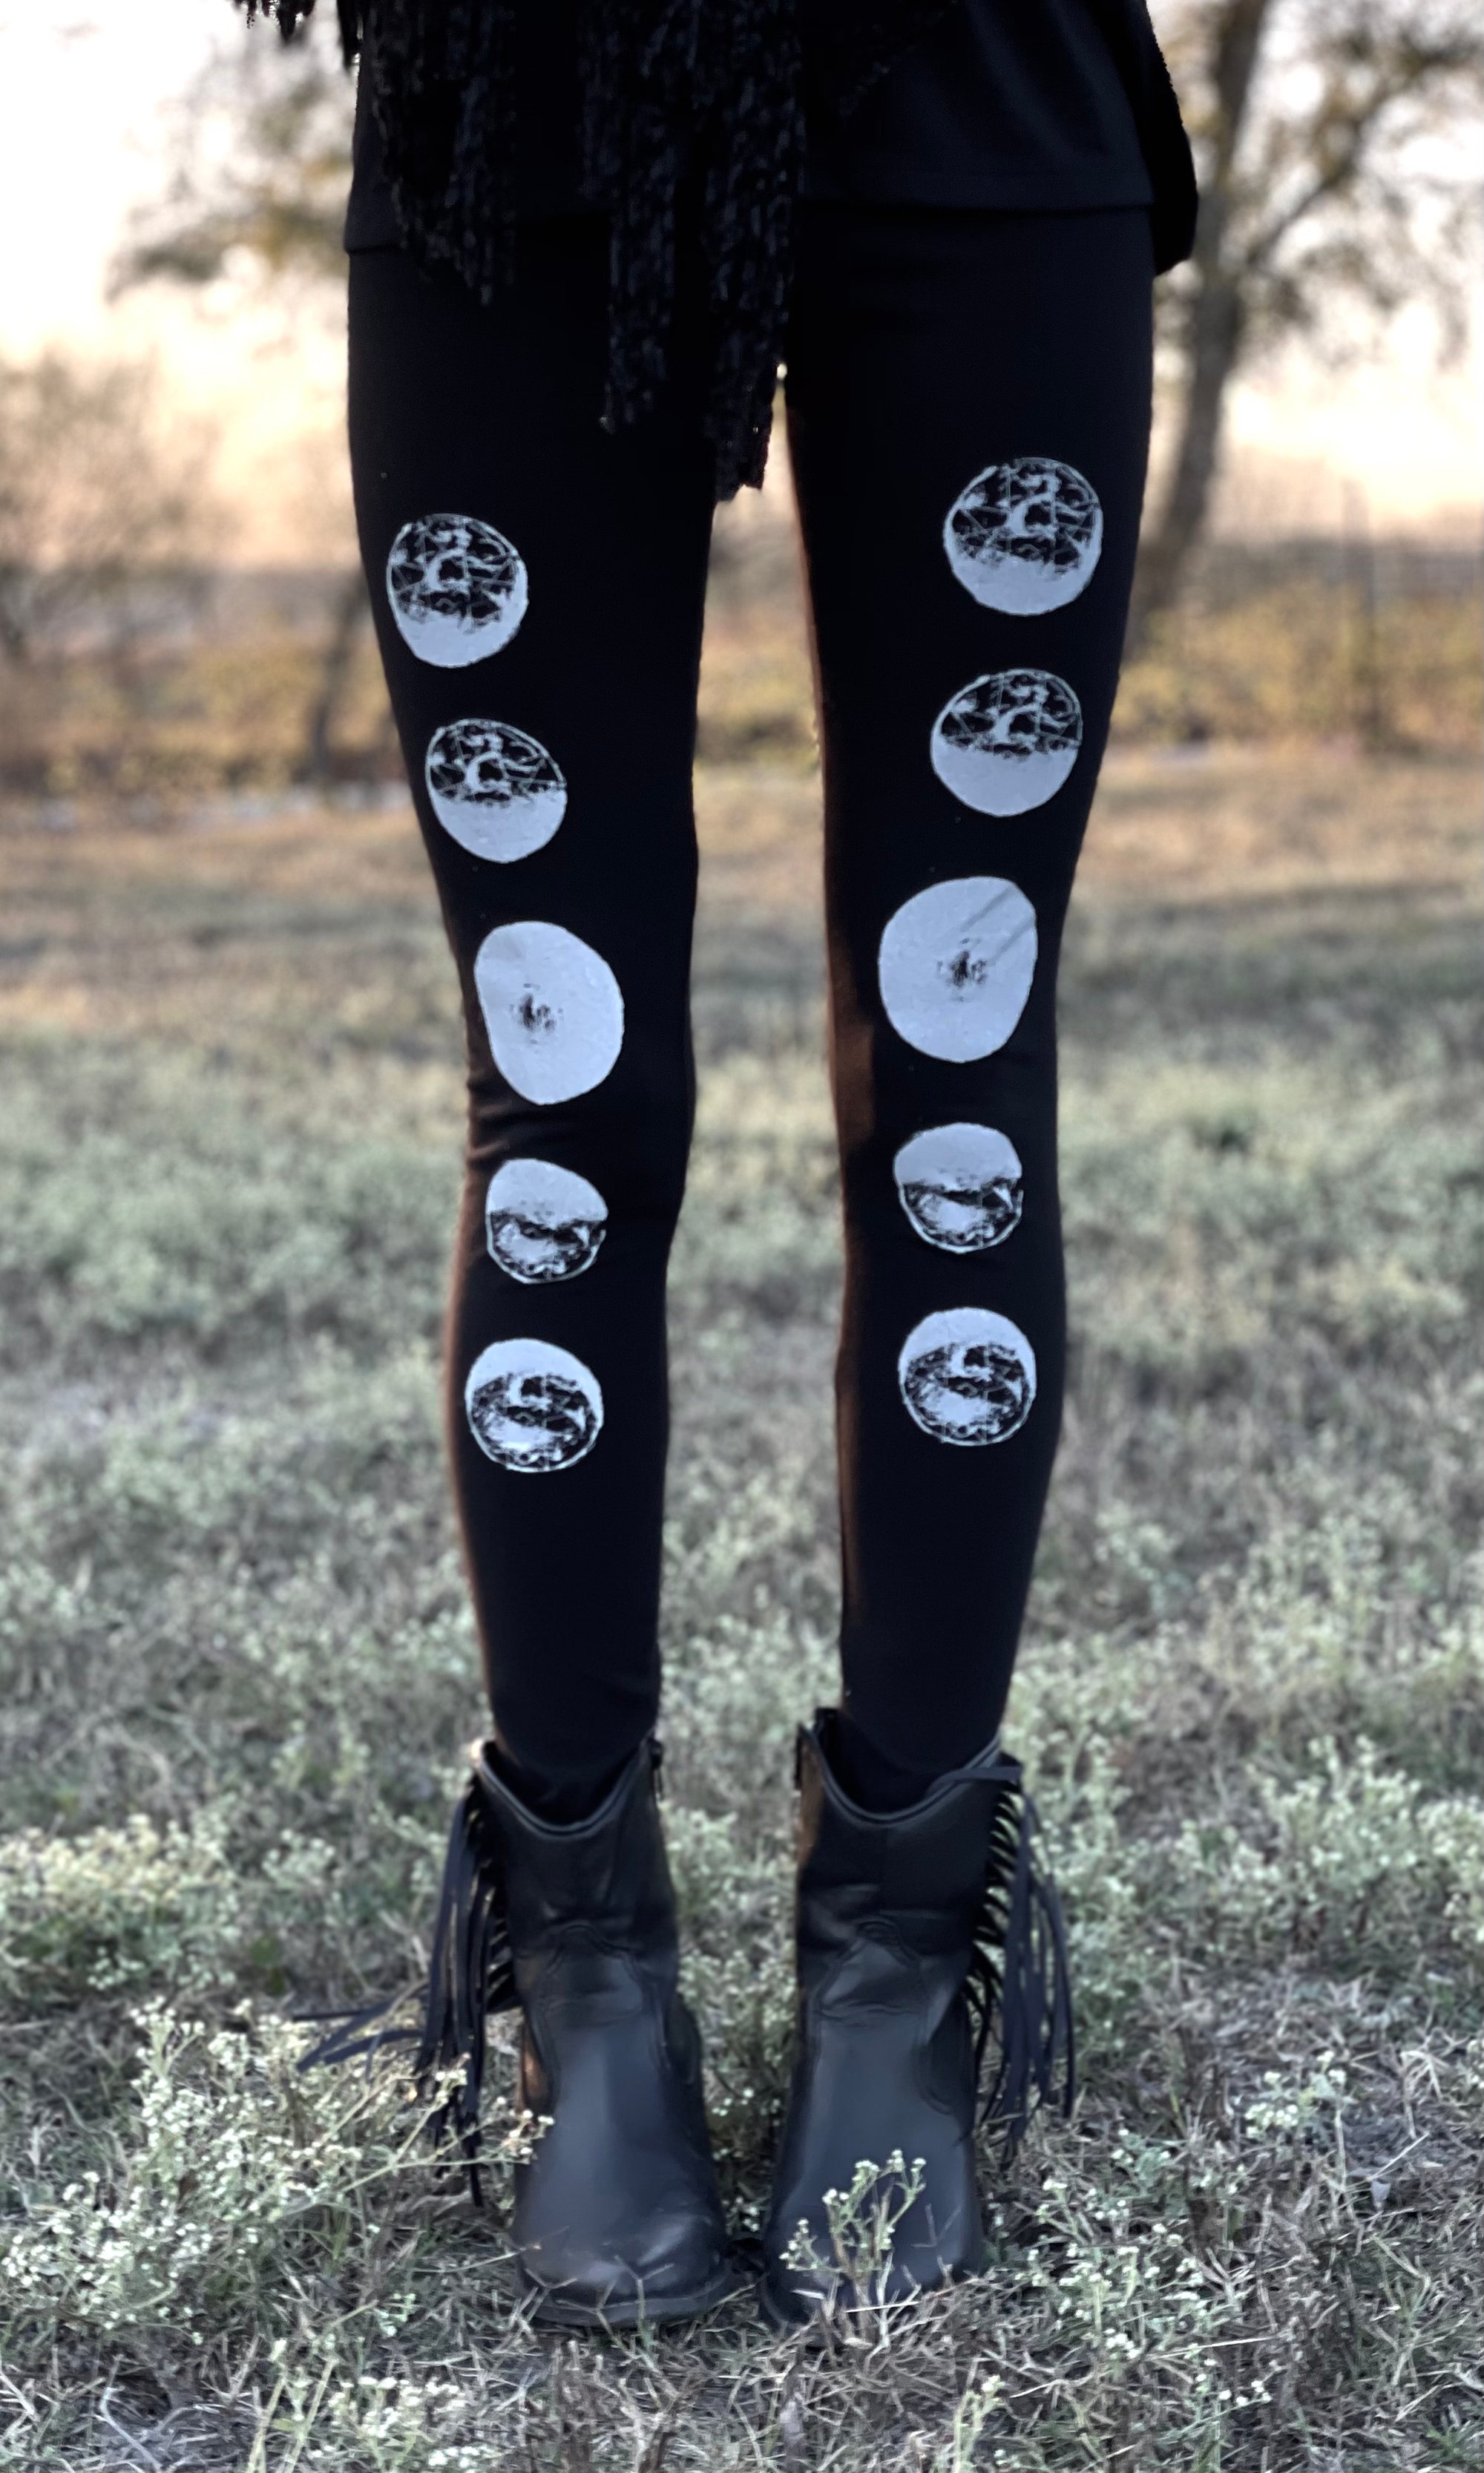 DISCONTINUED/ LAST CHANCE MOON PHASE LEGGINGS